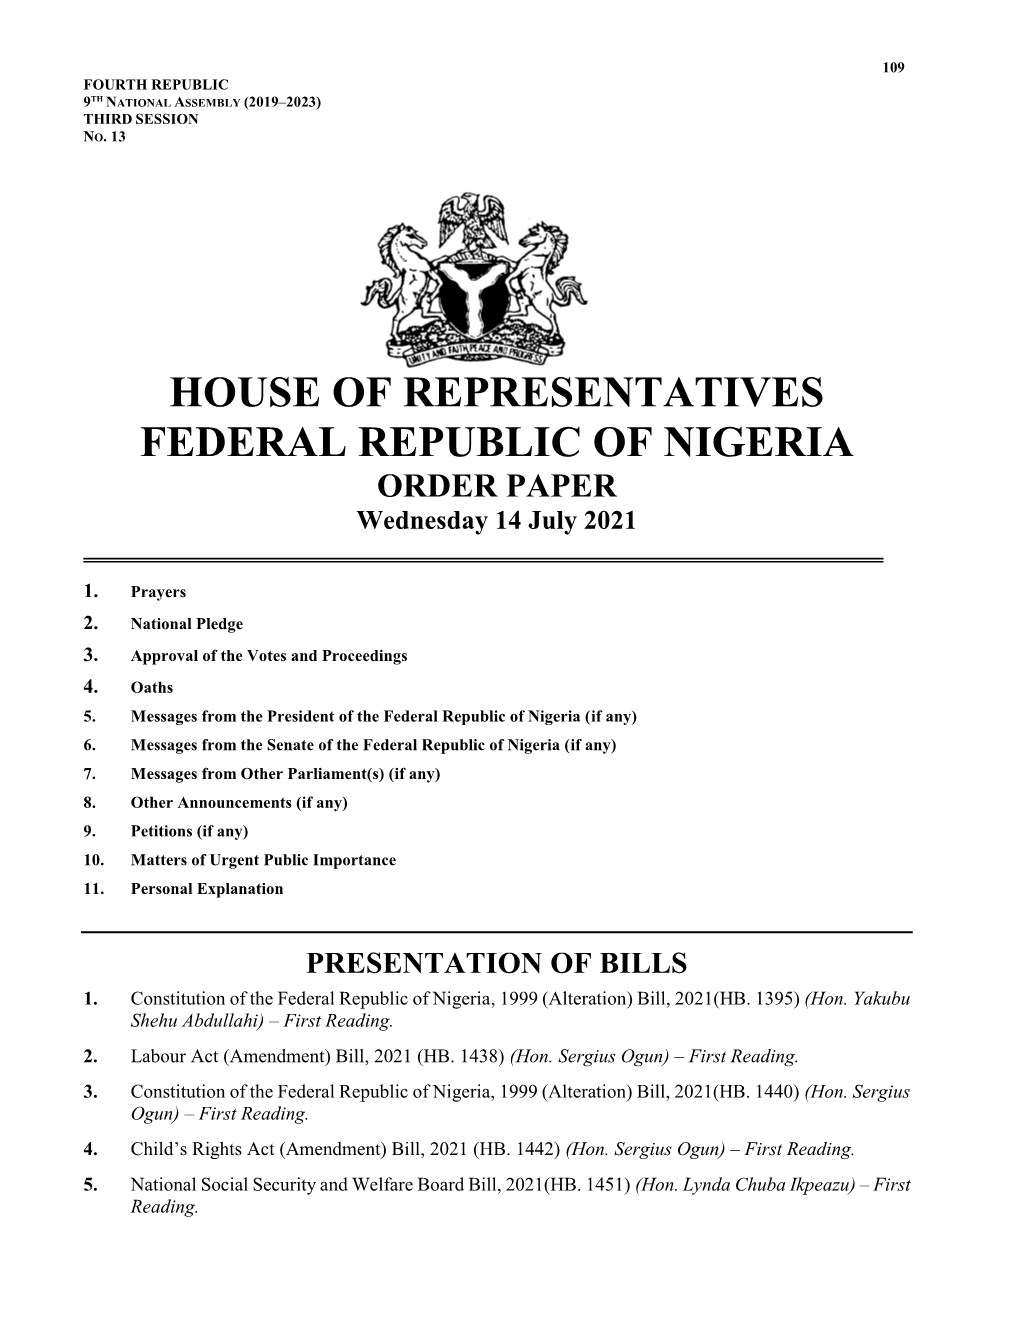 House of Reps Order Paper, Wednesday, 14 July, 2021